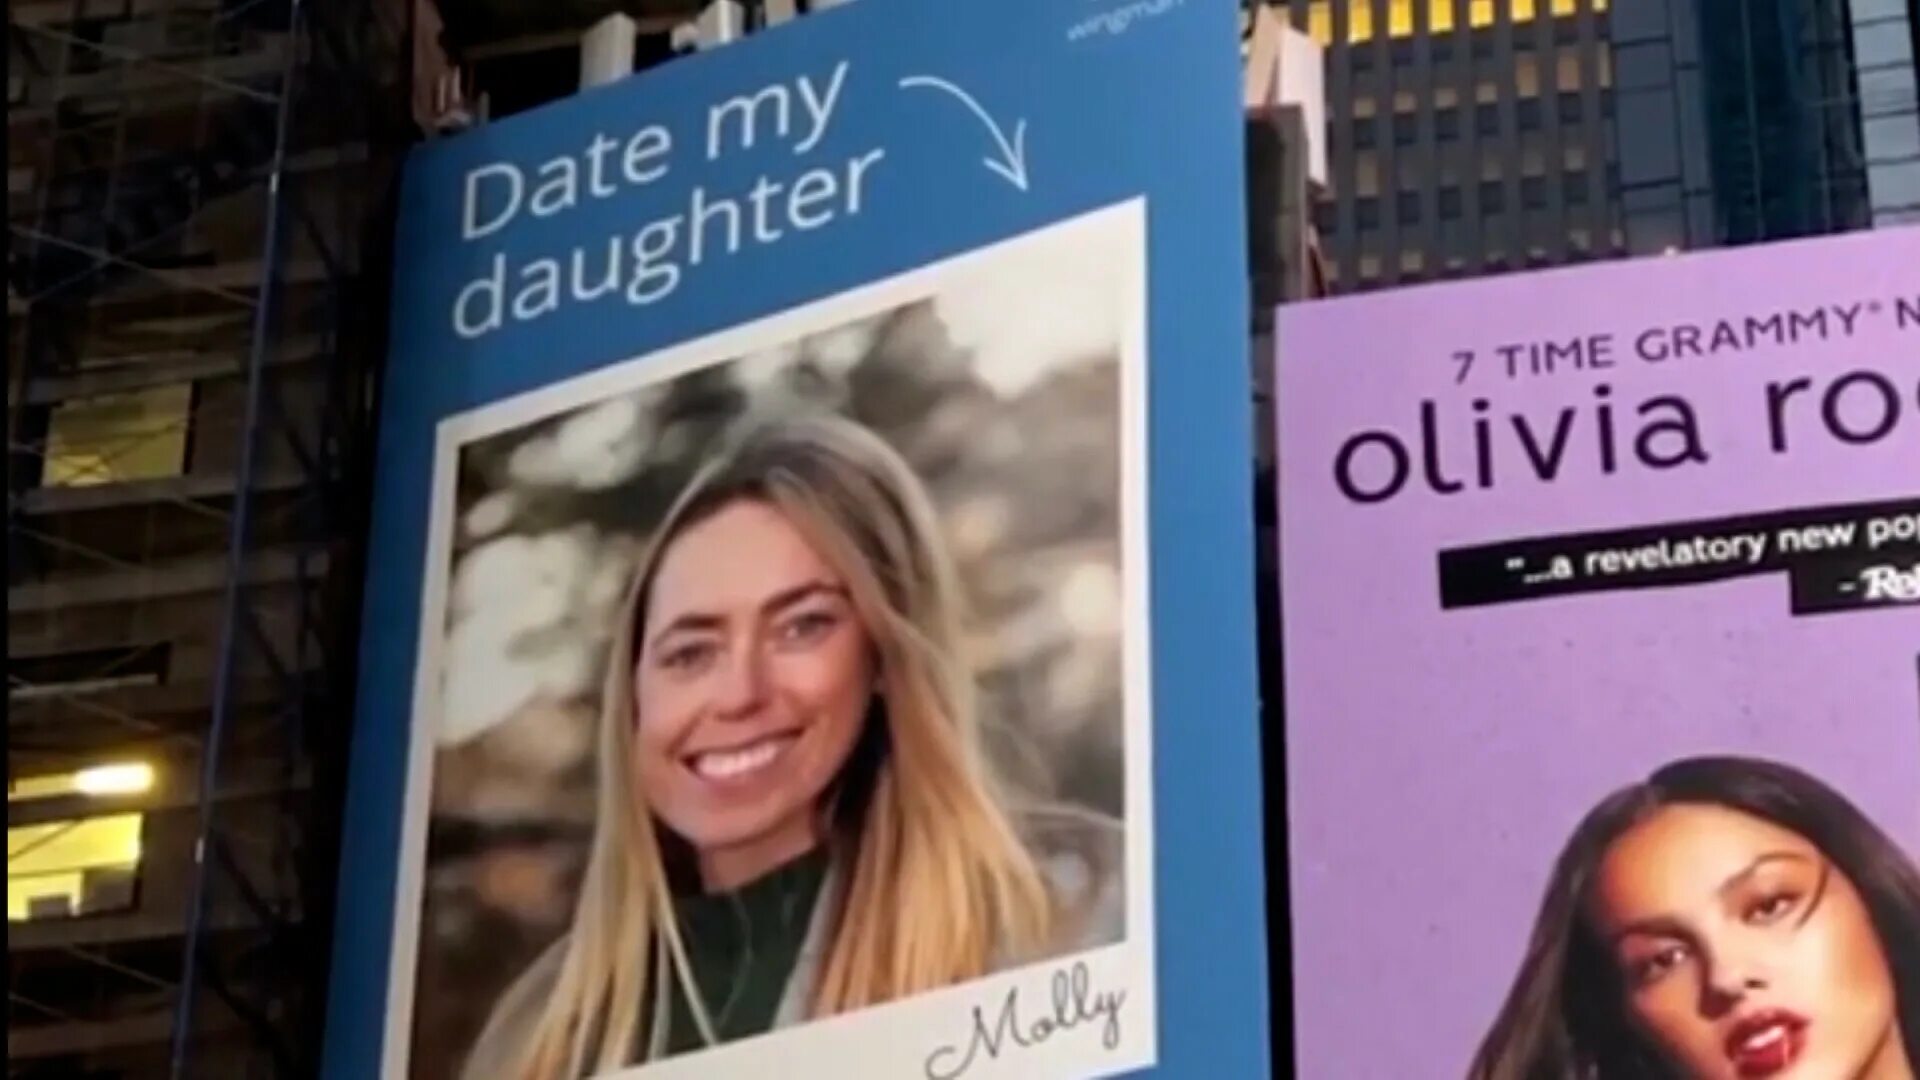 Daughter of time. Times Square Billboard.